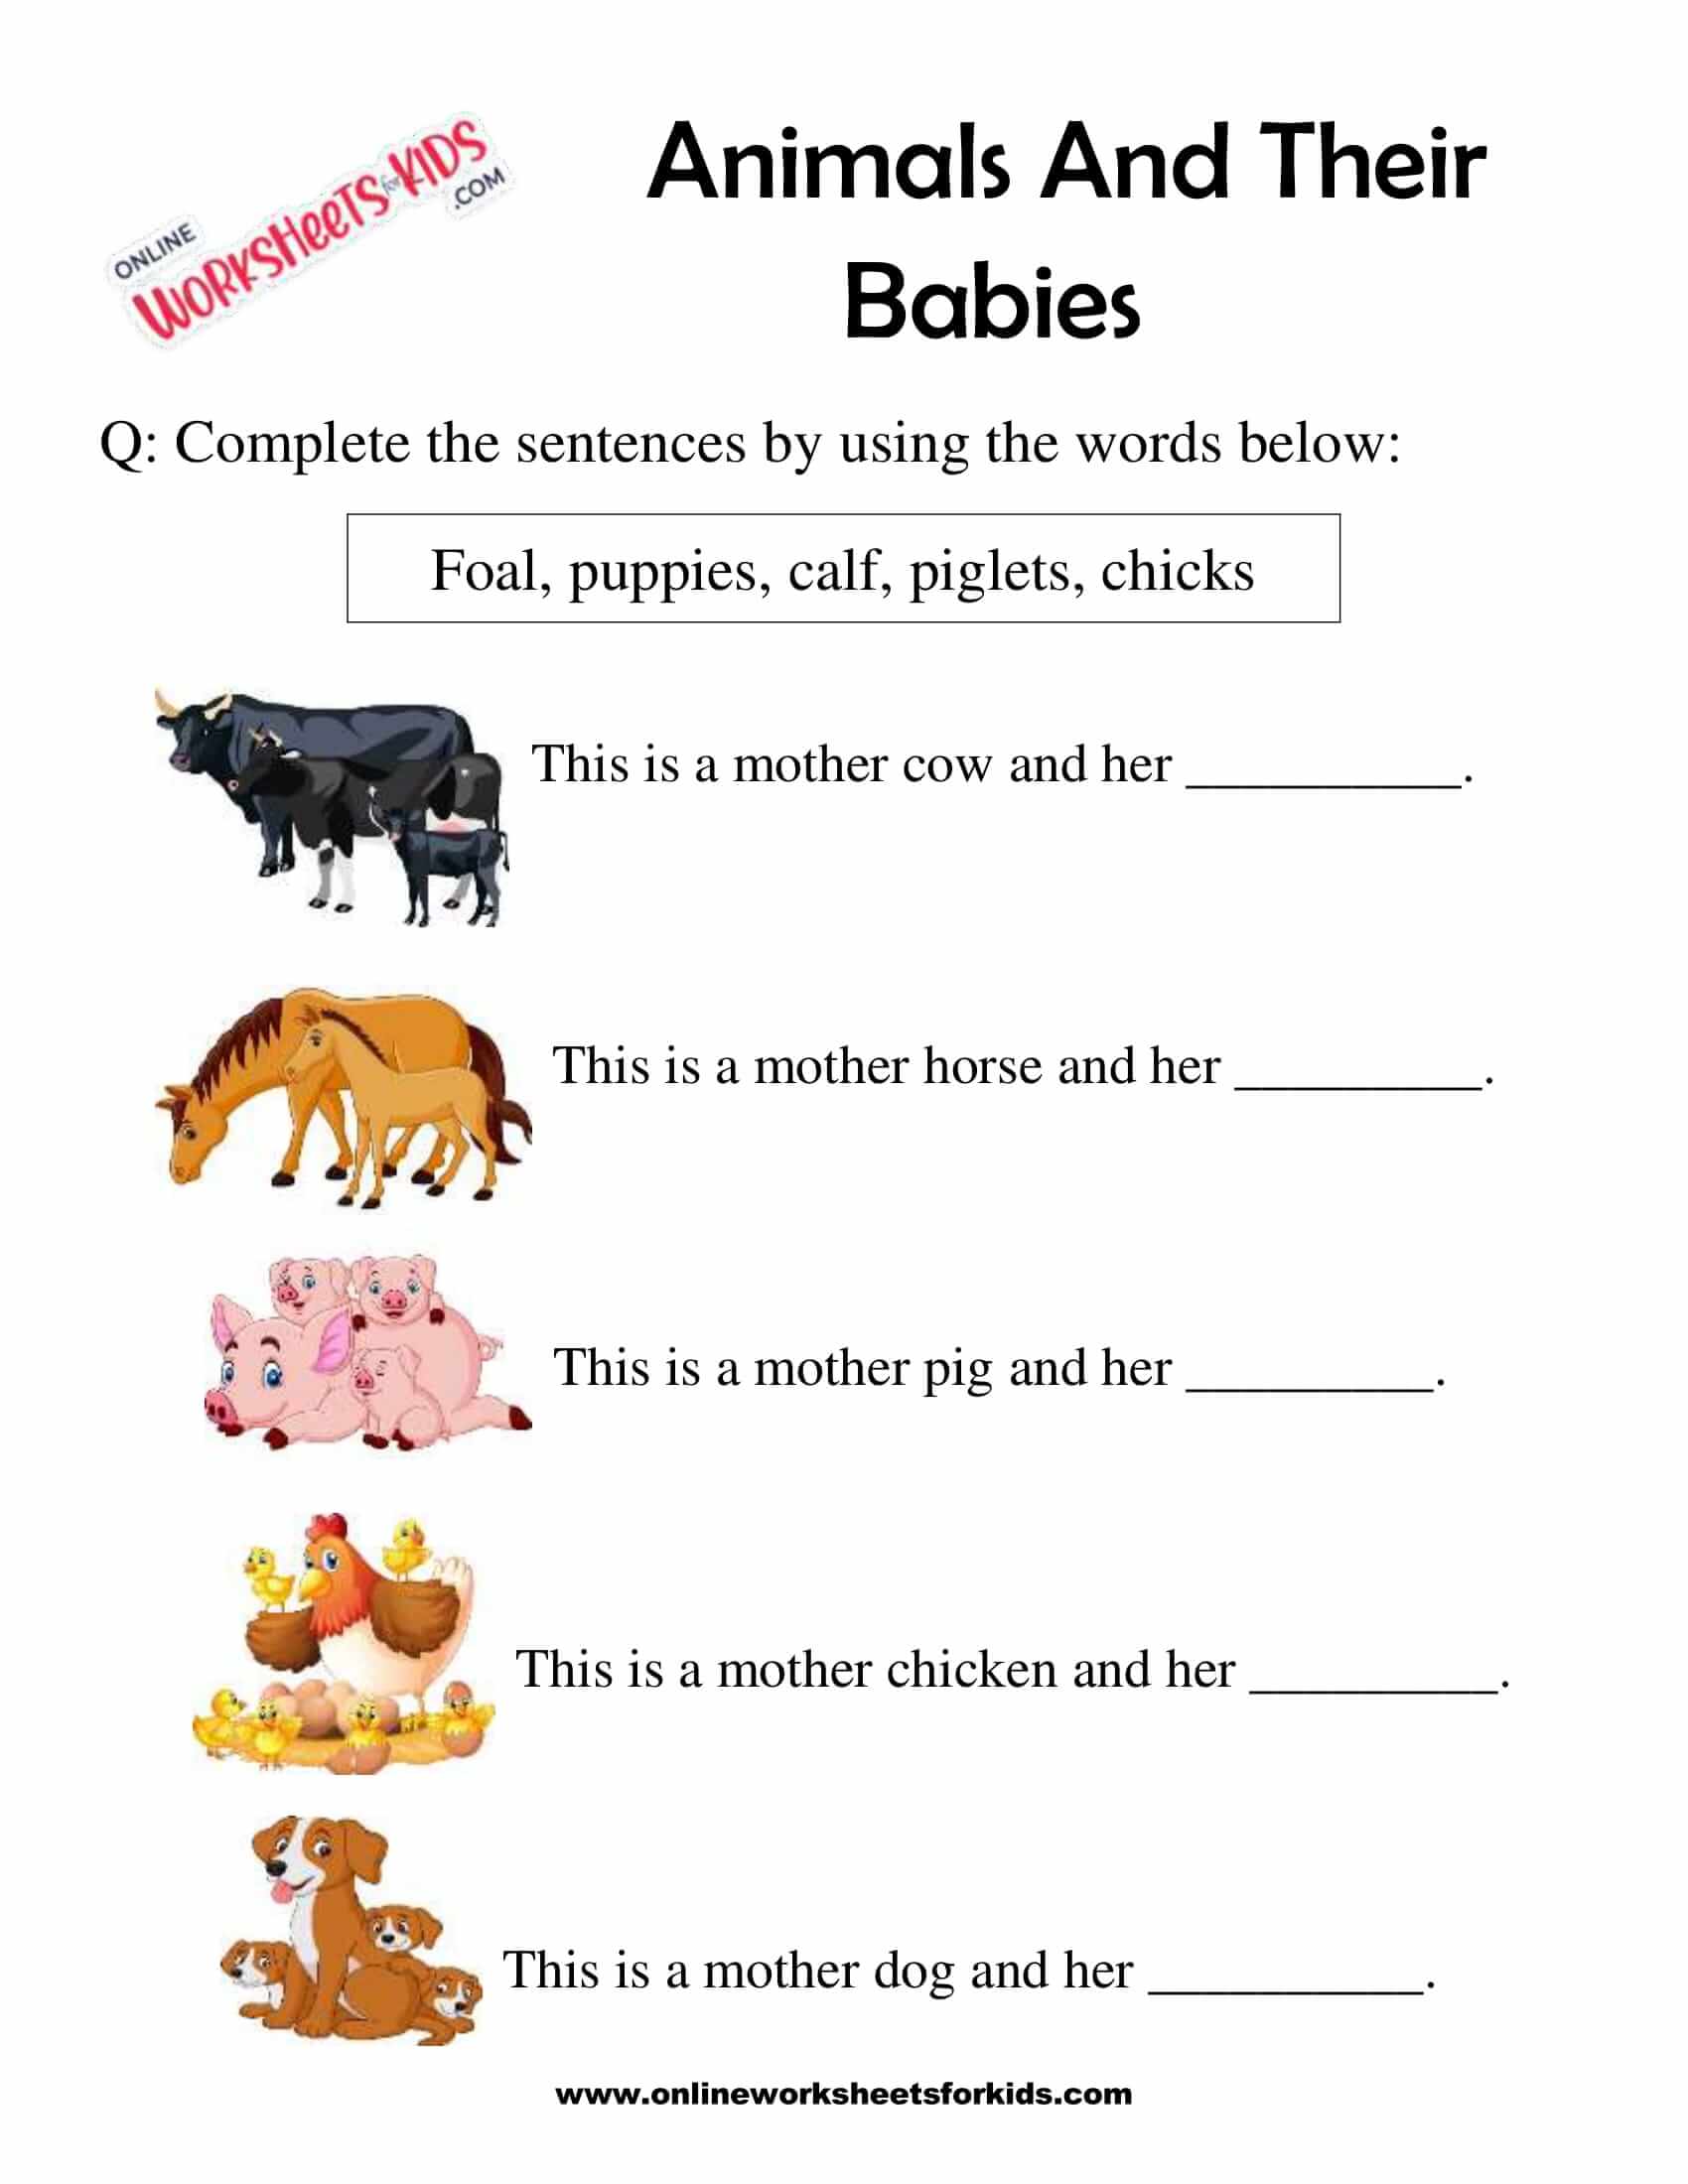 Free Animal and Their Babies Worksheet for Grade 1